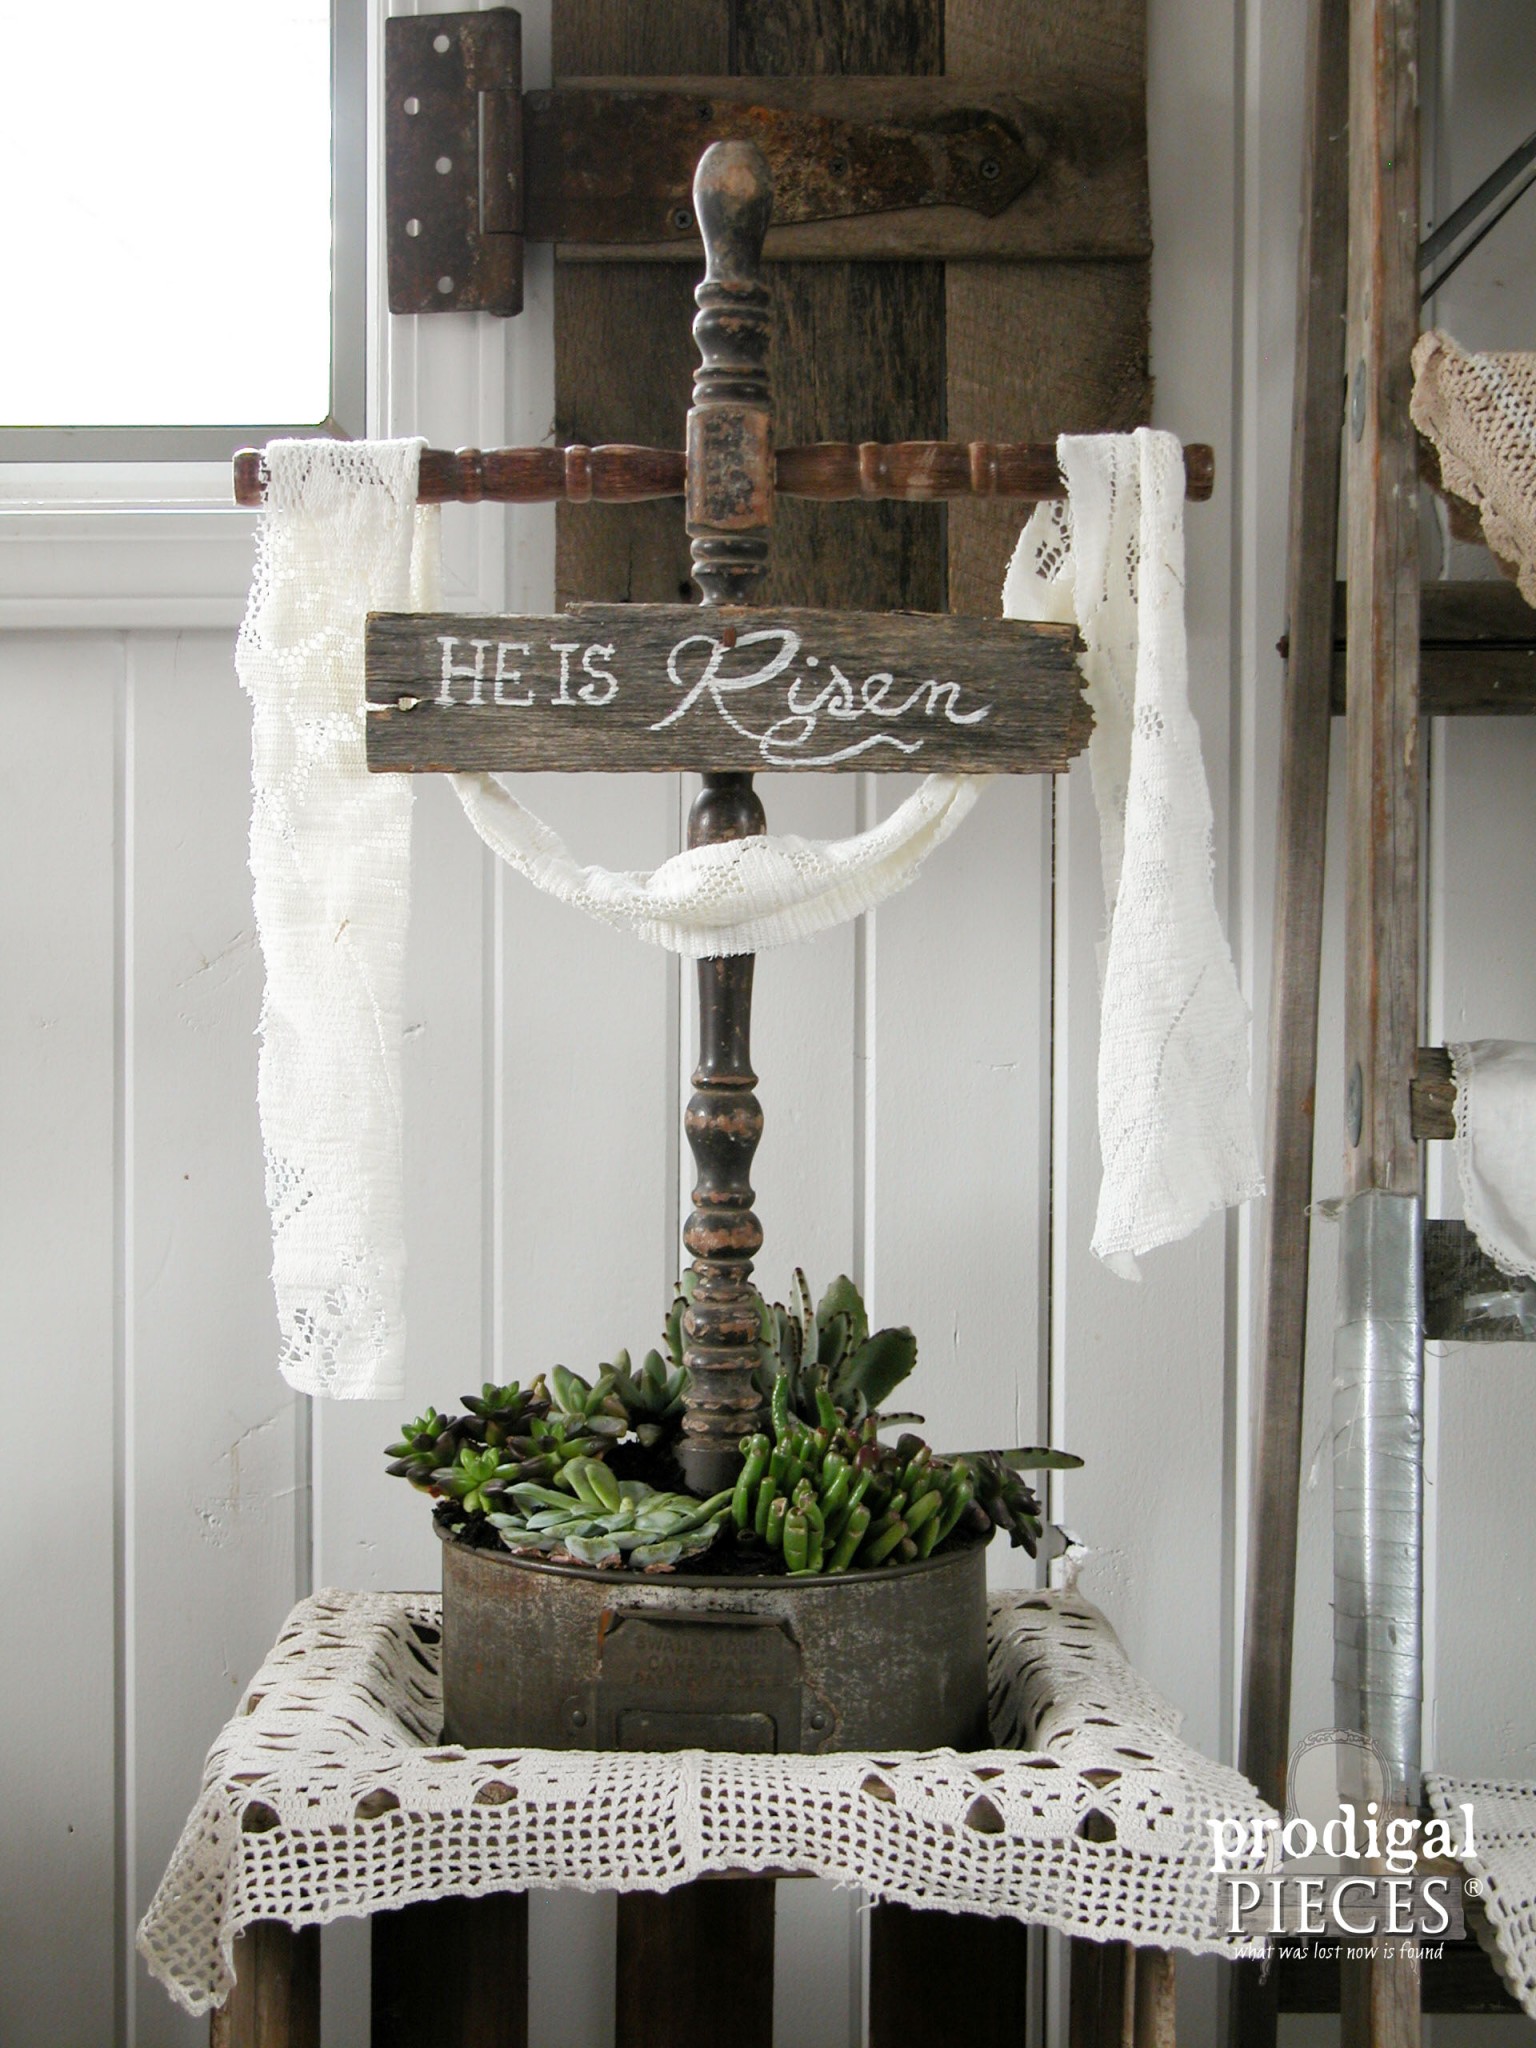 Repurposed Easter Cross from Salvaged Junk by Prodigal Pieces | prodigalpieces.com